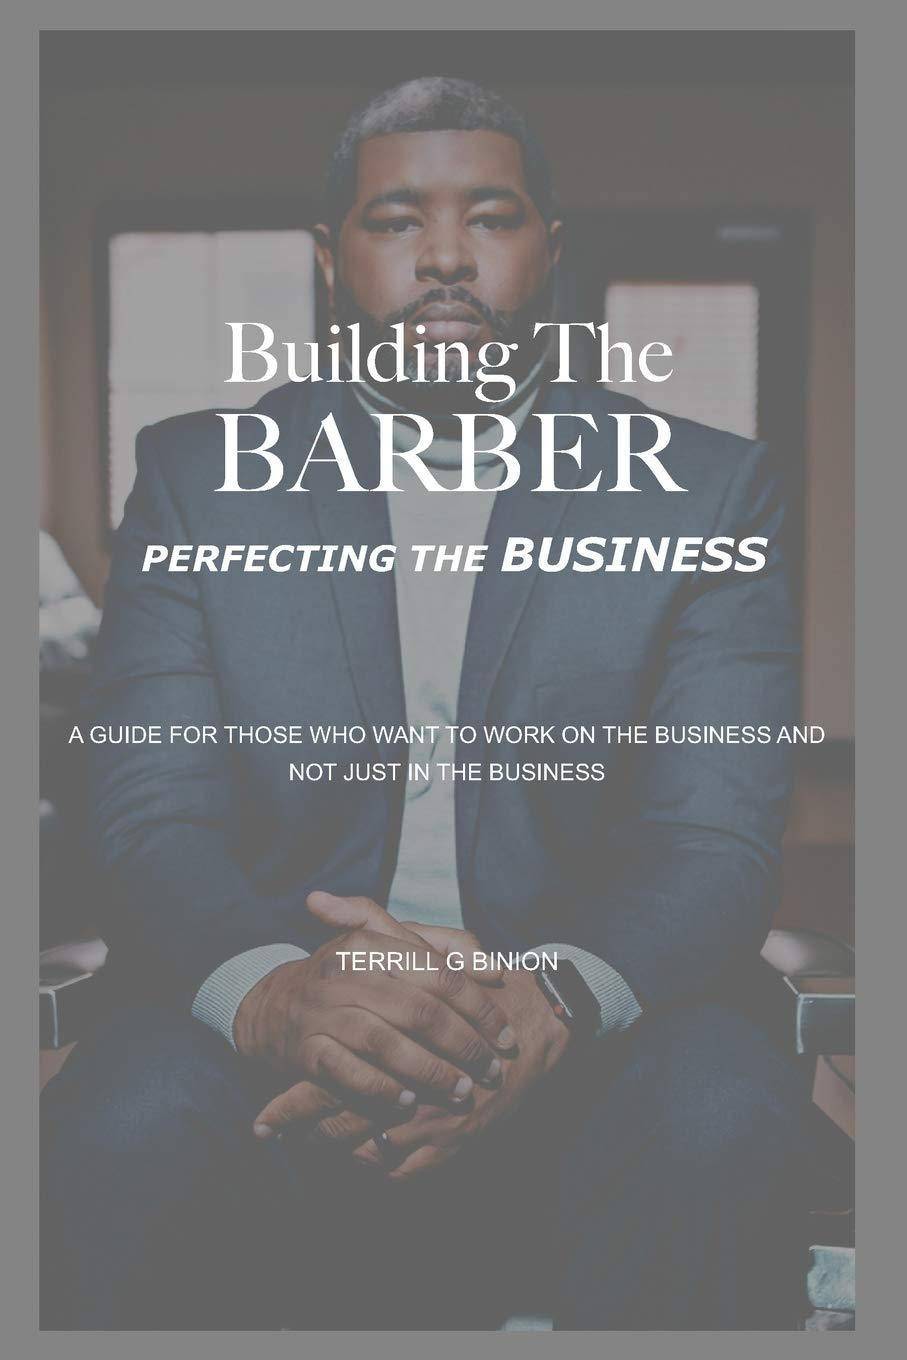 Building The Barber: Perfecting the Business - SureShot Books Publishing LLC